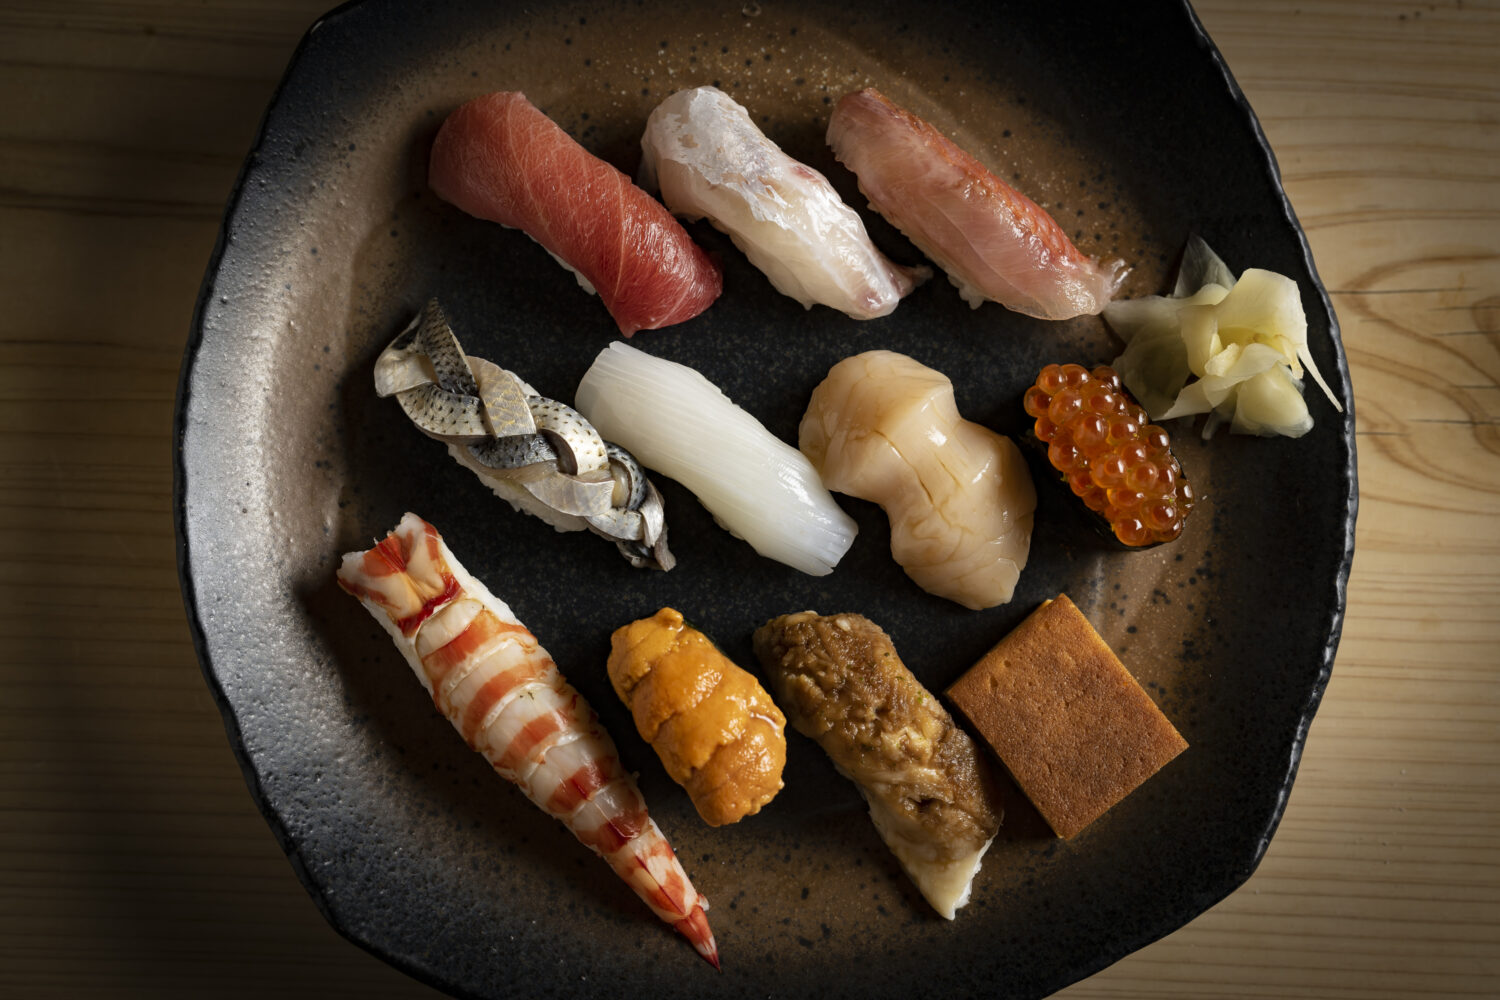 The smart way to enjoy Counter Sushi | Otsumami (side dishes) and sushi which go great with sake!